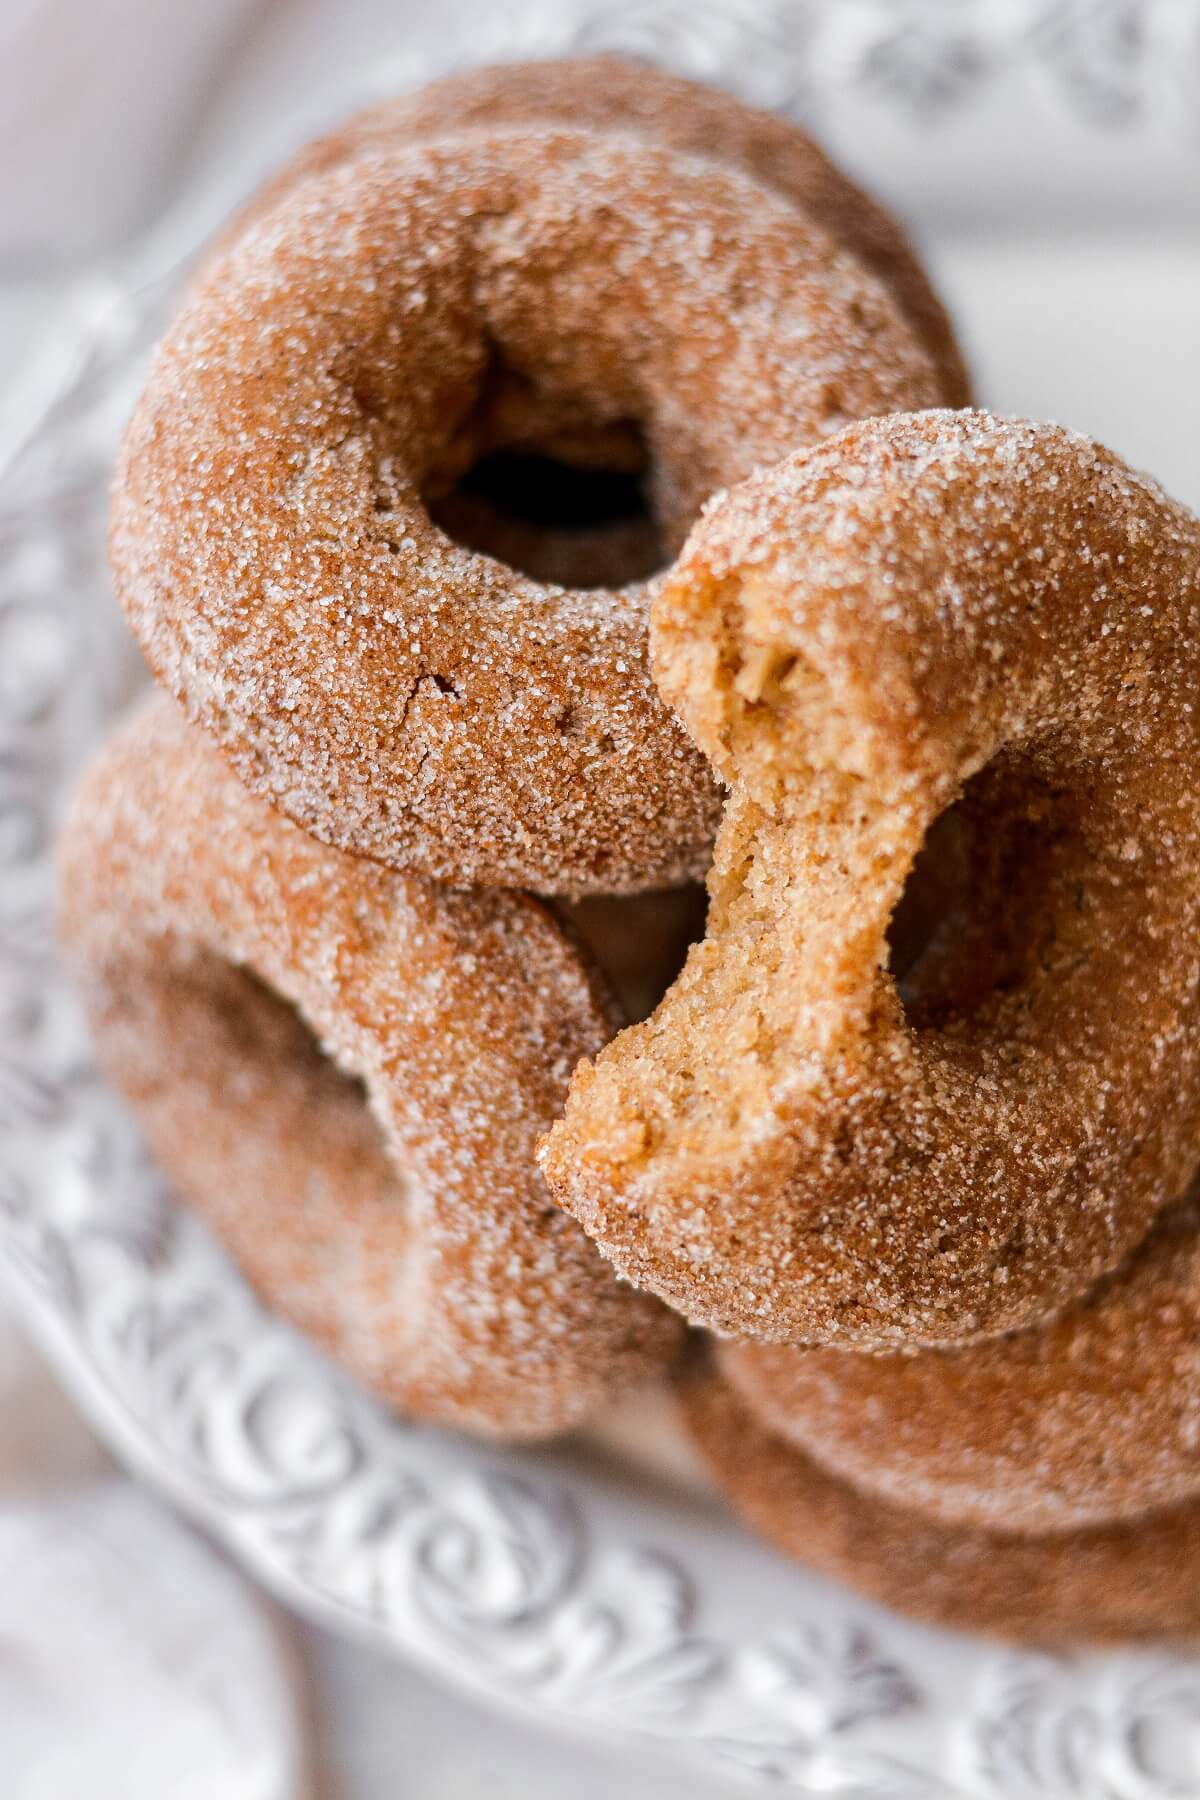 Apple cider doughnuts, one with a bite taken.